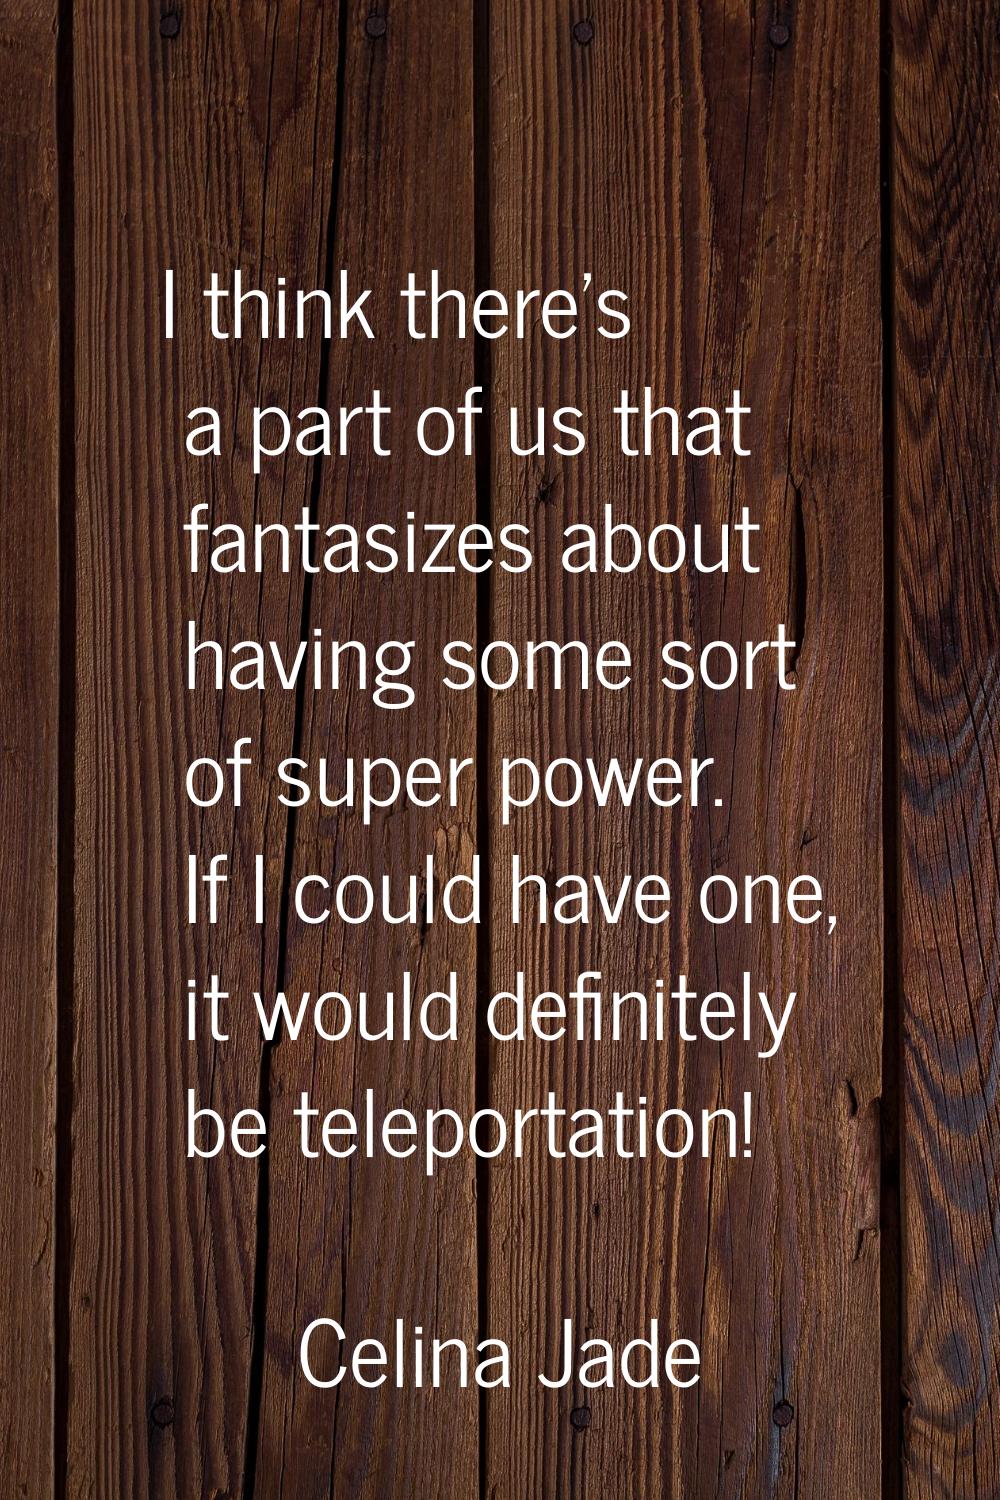 I think there's a part of us that fantasizes about having some sort of super power. If I could have